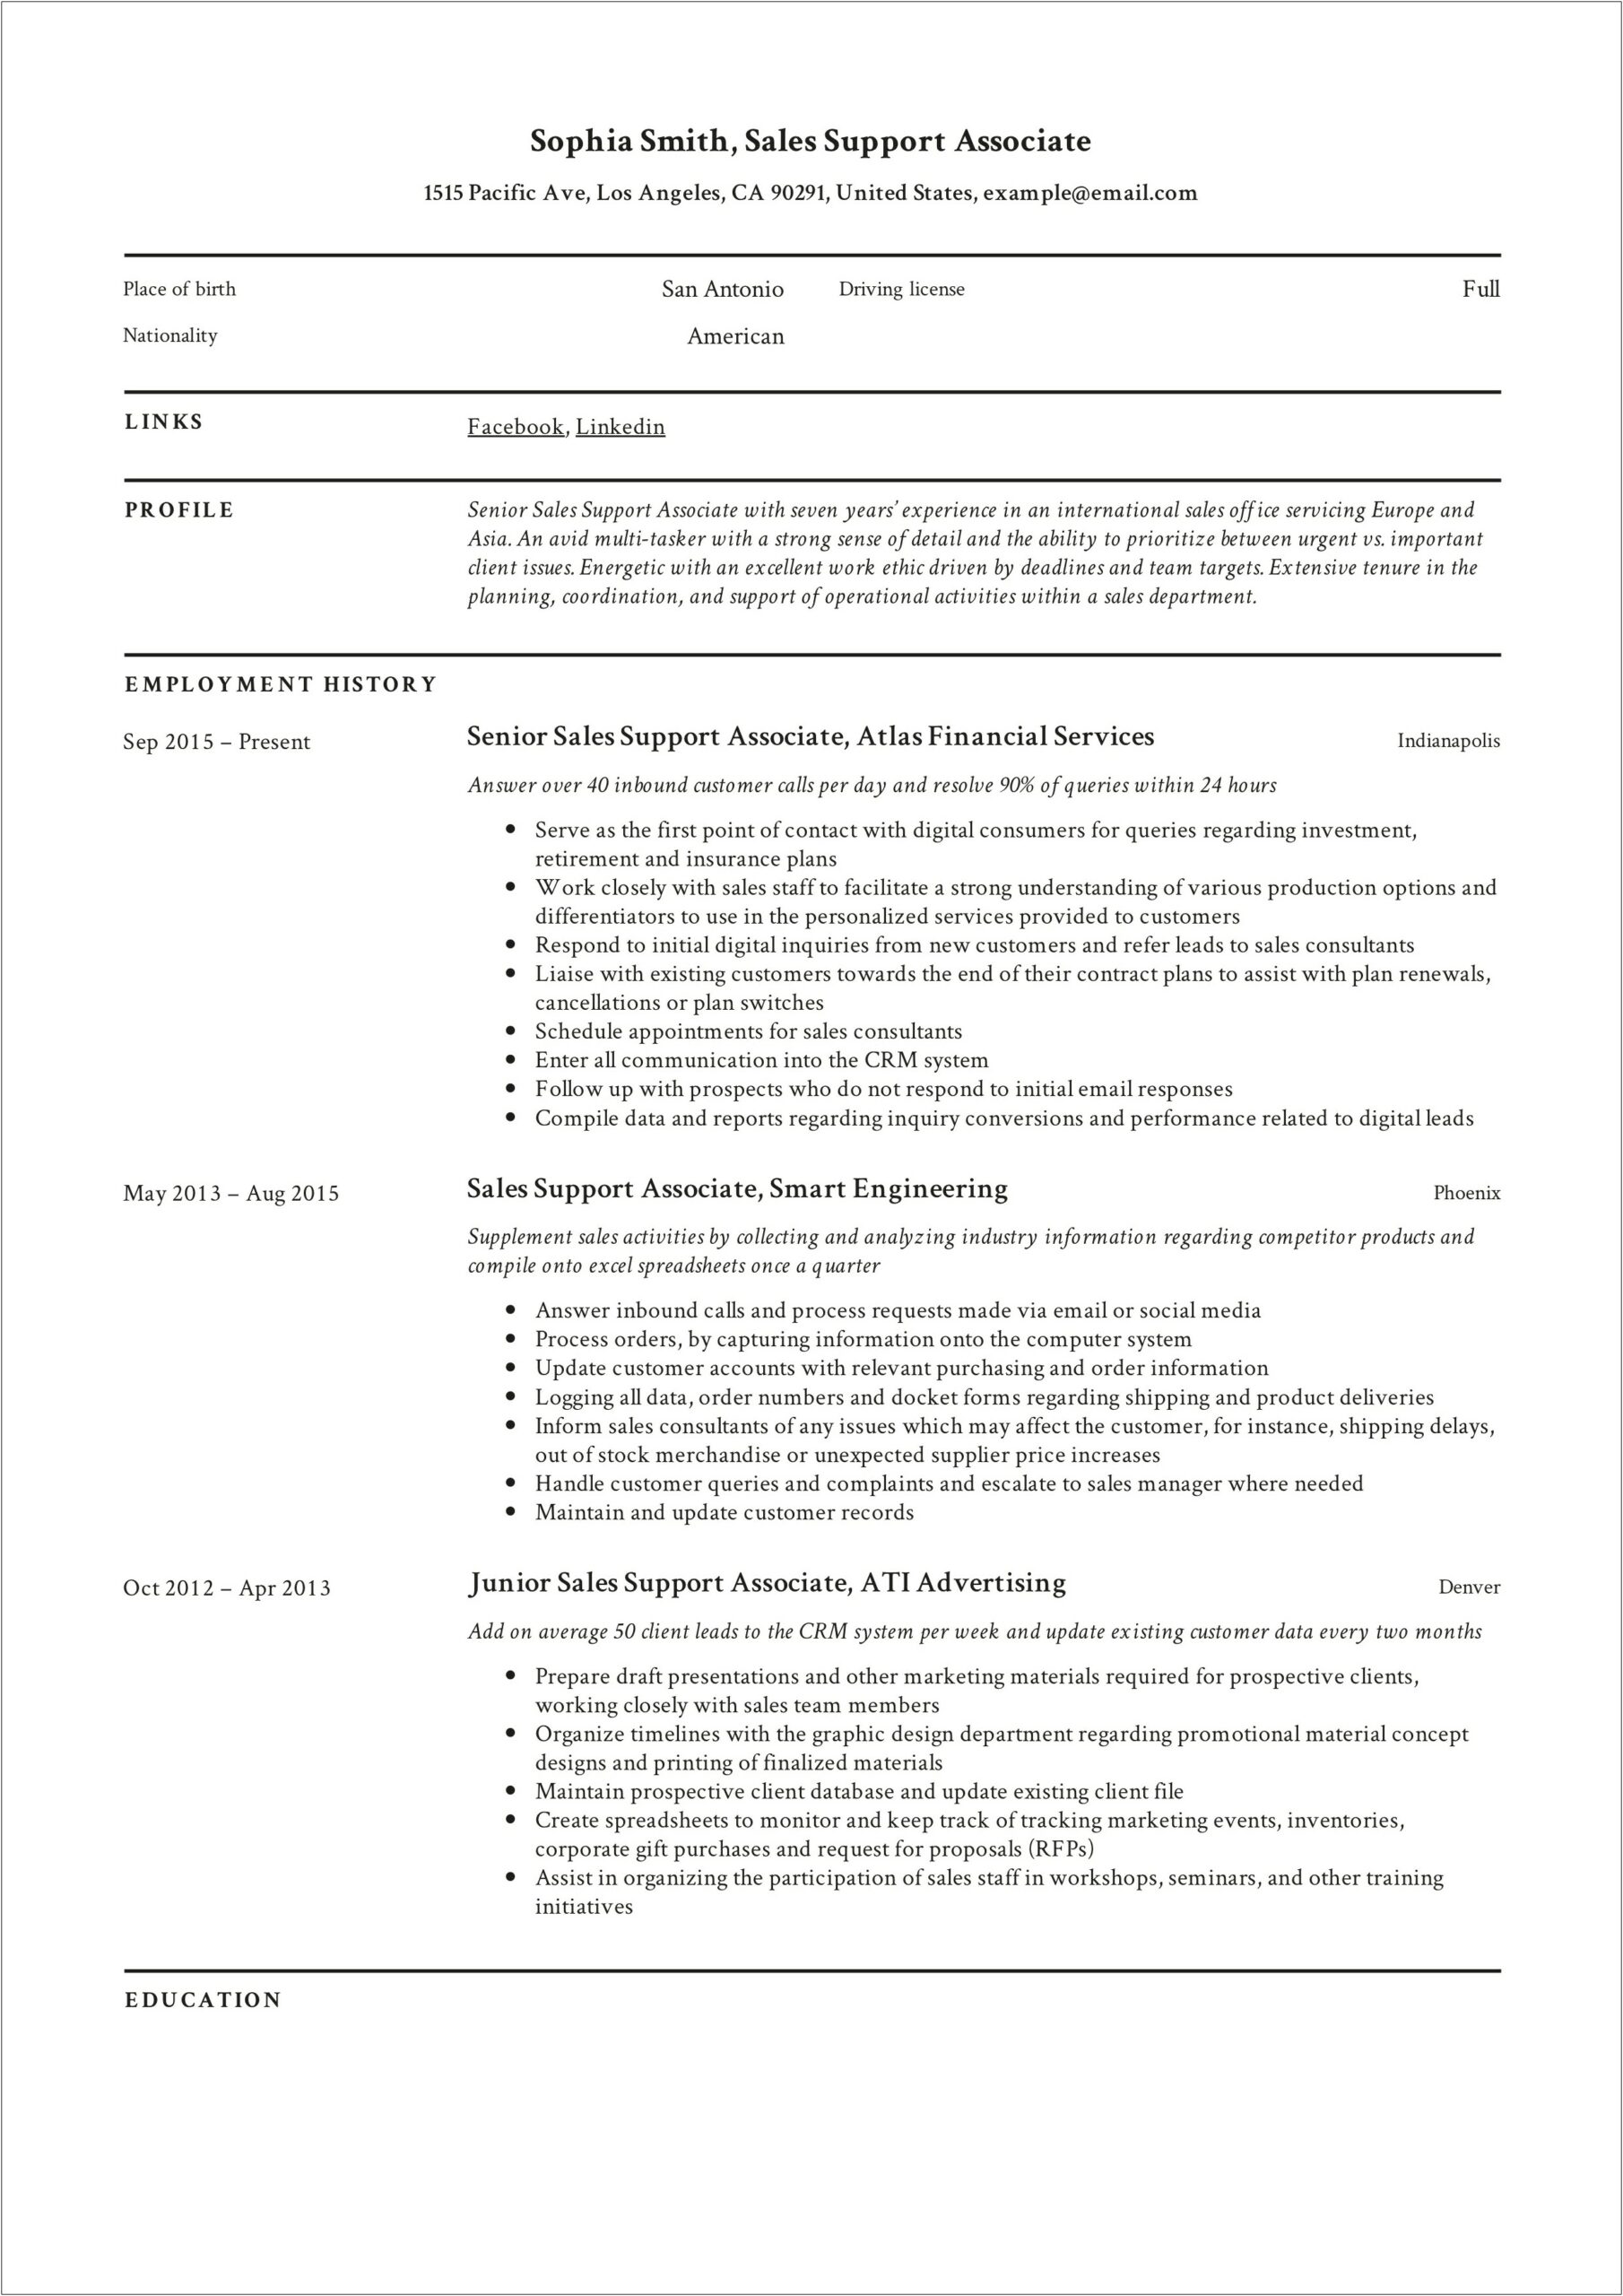 Sales Support Specialist Skills On A Resume